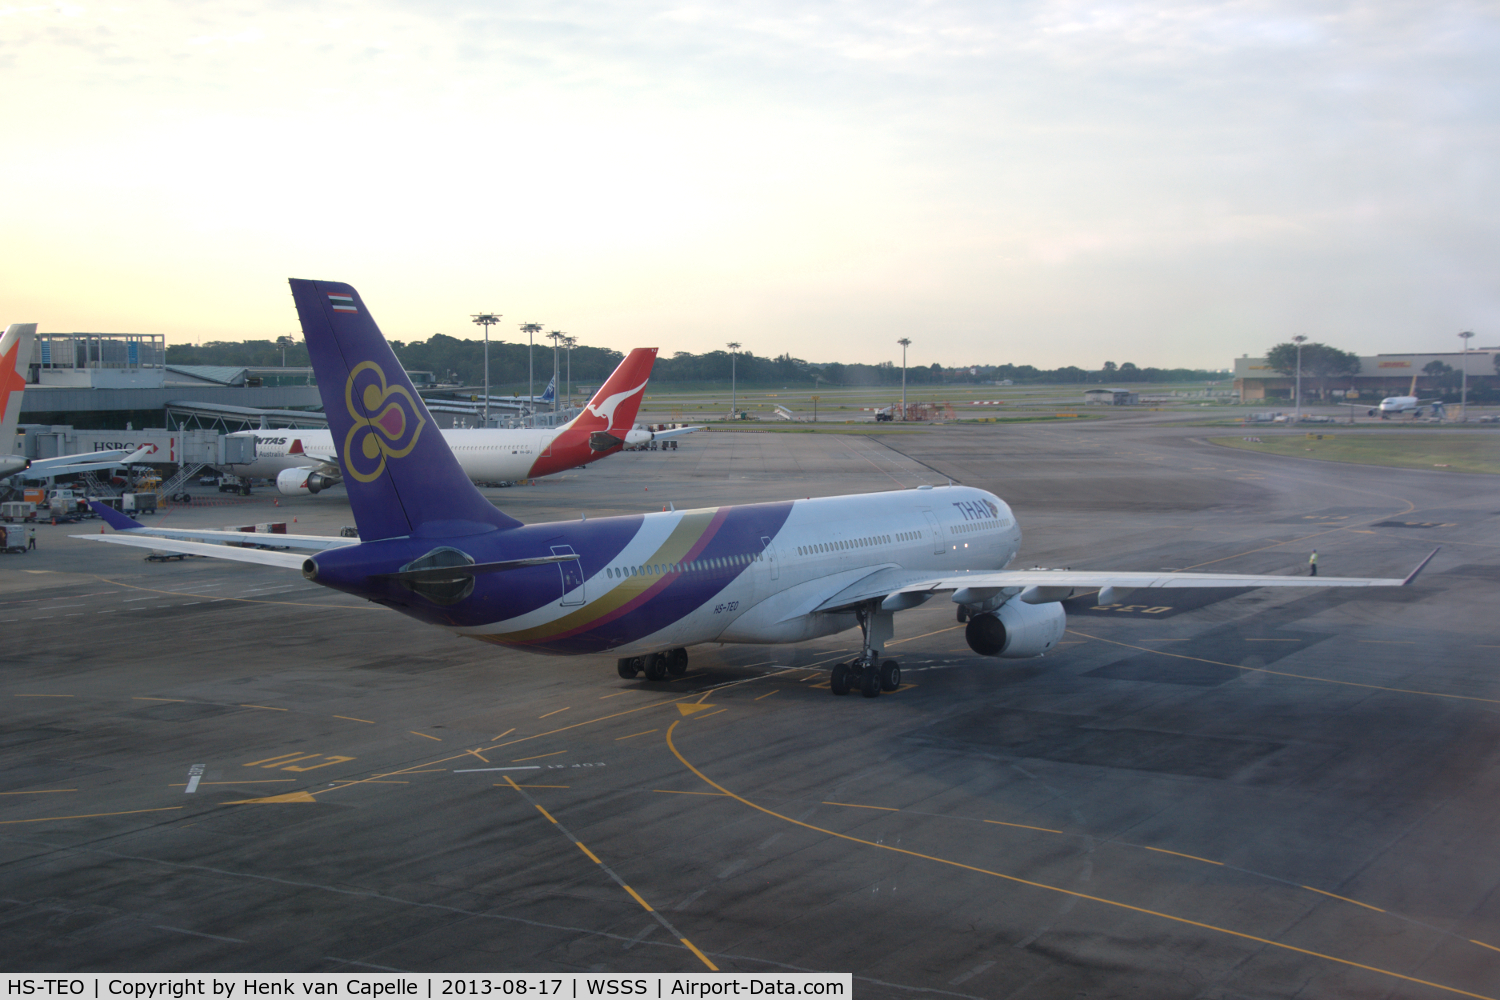 HS-TEO, 2009 Airbus A330-343 C/N 1003, Thai Airbus A330-300 taxying away from the terminal at Singapore Changi airport.